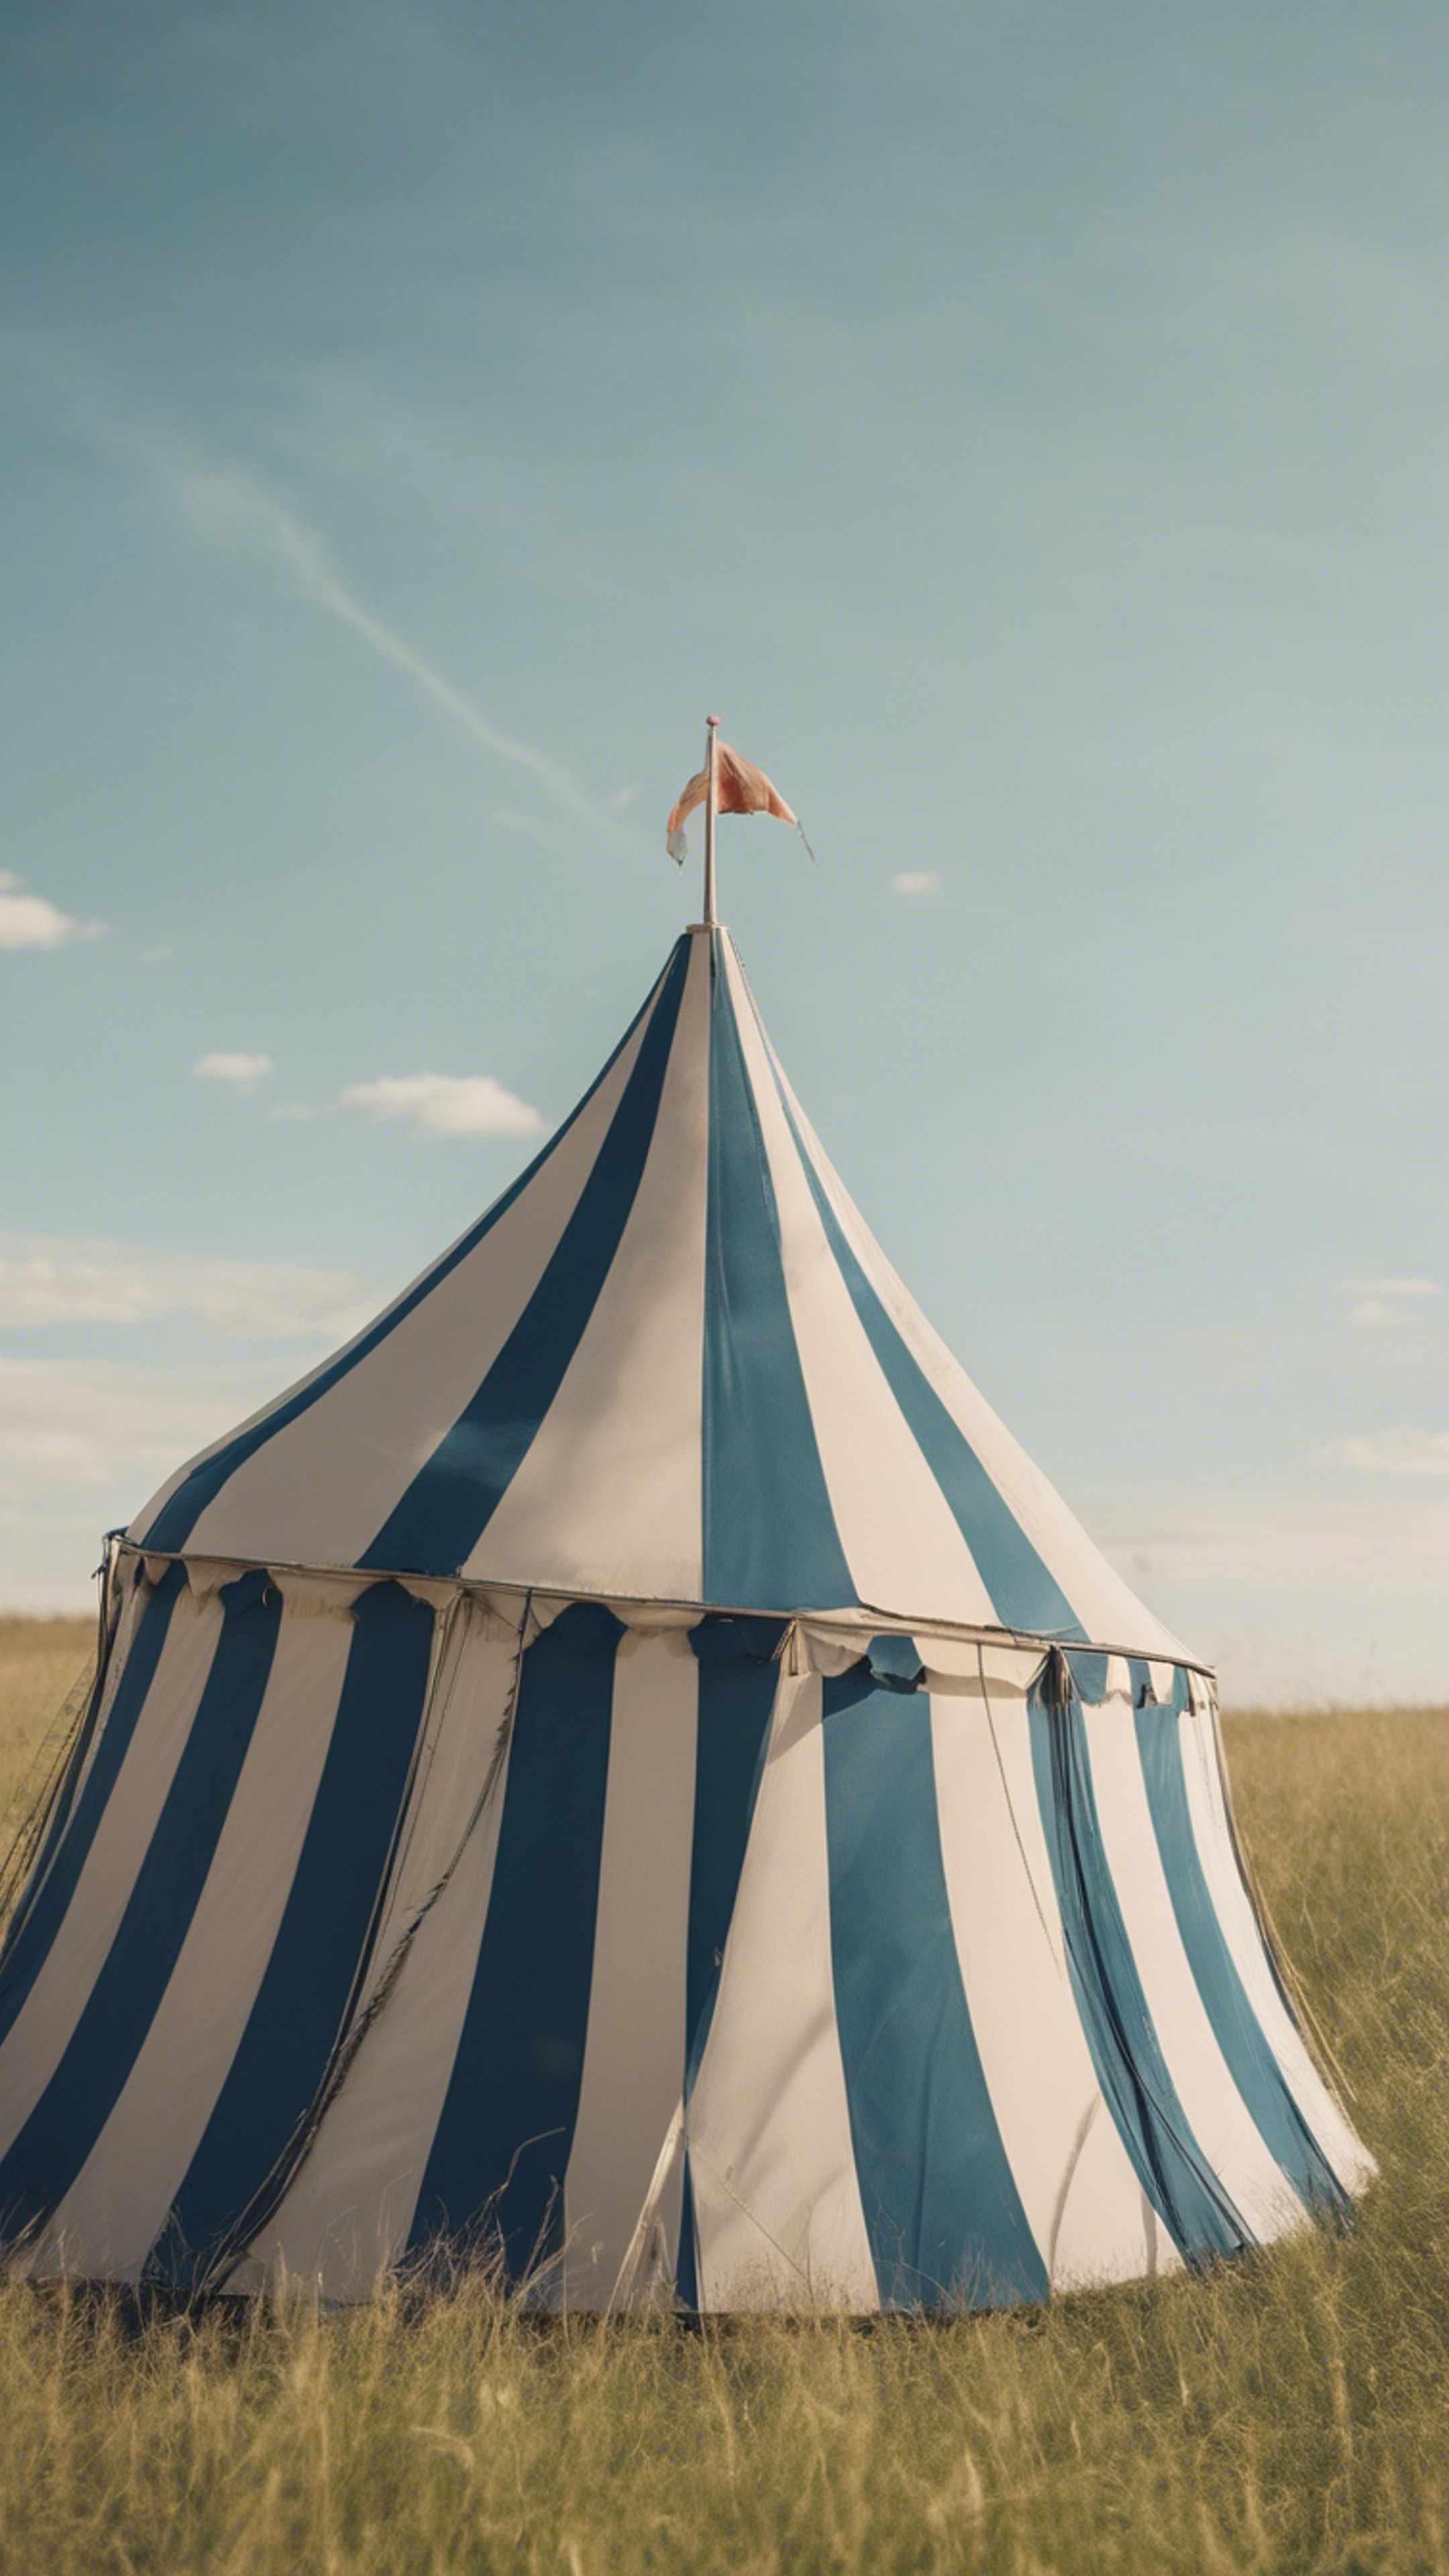 A vintage striped circus tent in a grassy field with a blue sky overhead. Wallpaper[07d58b74cbfe41aa8350]